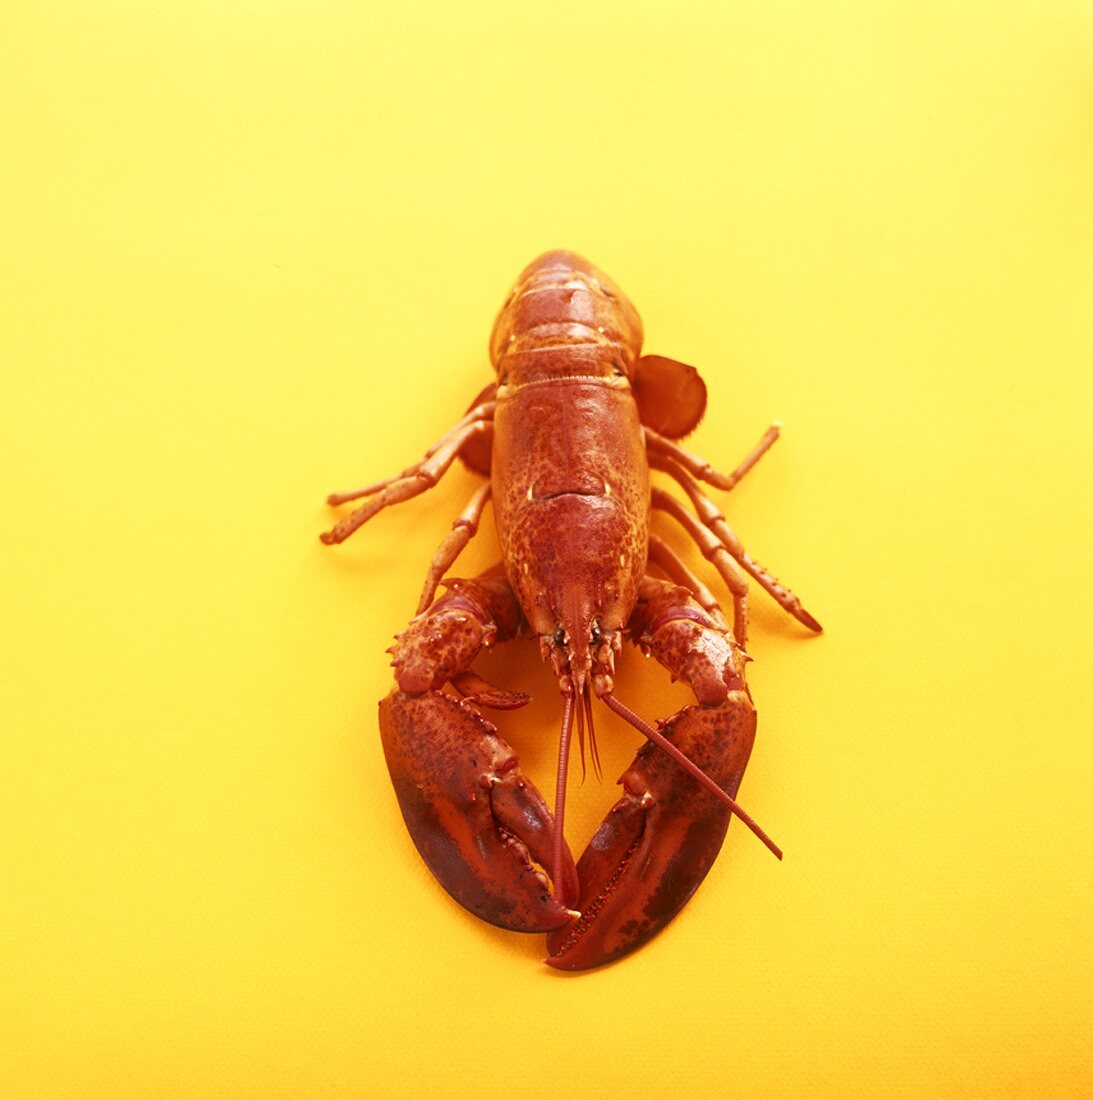 A cooked lobster on a yellow background